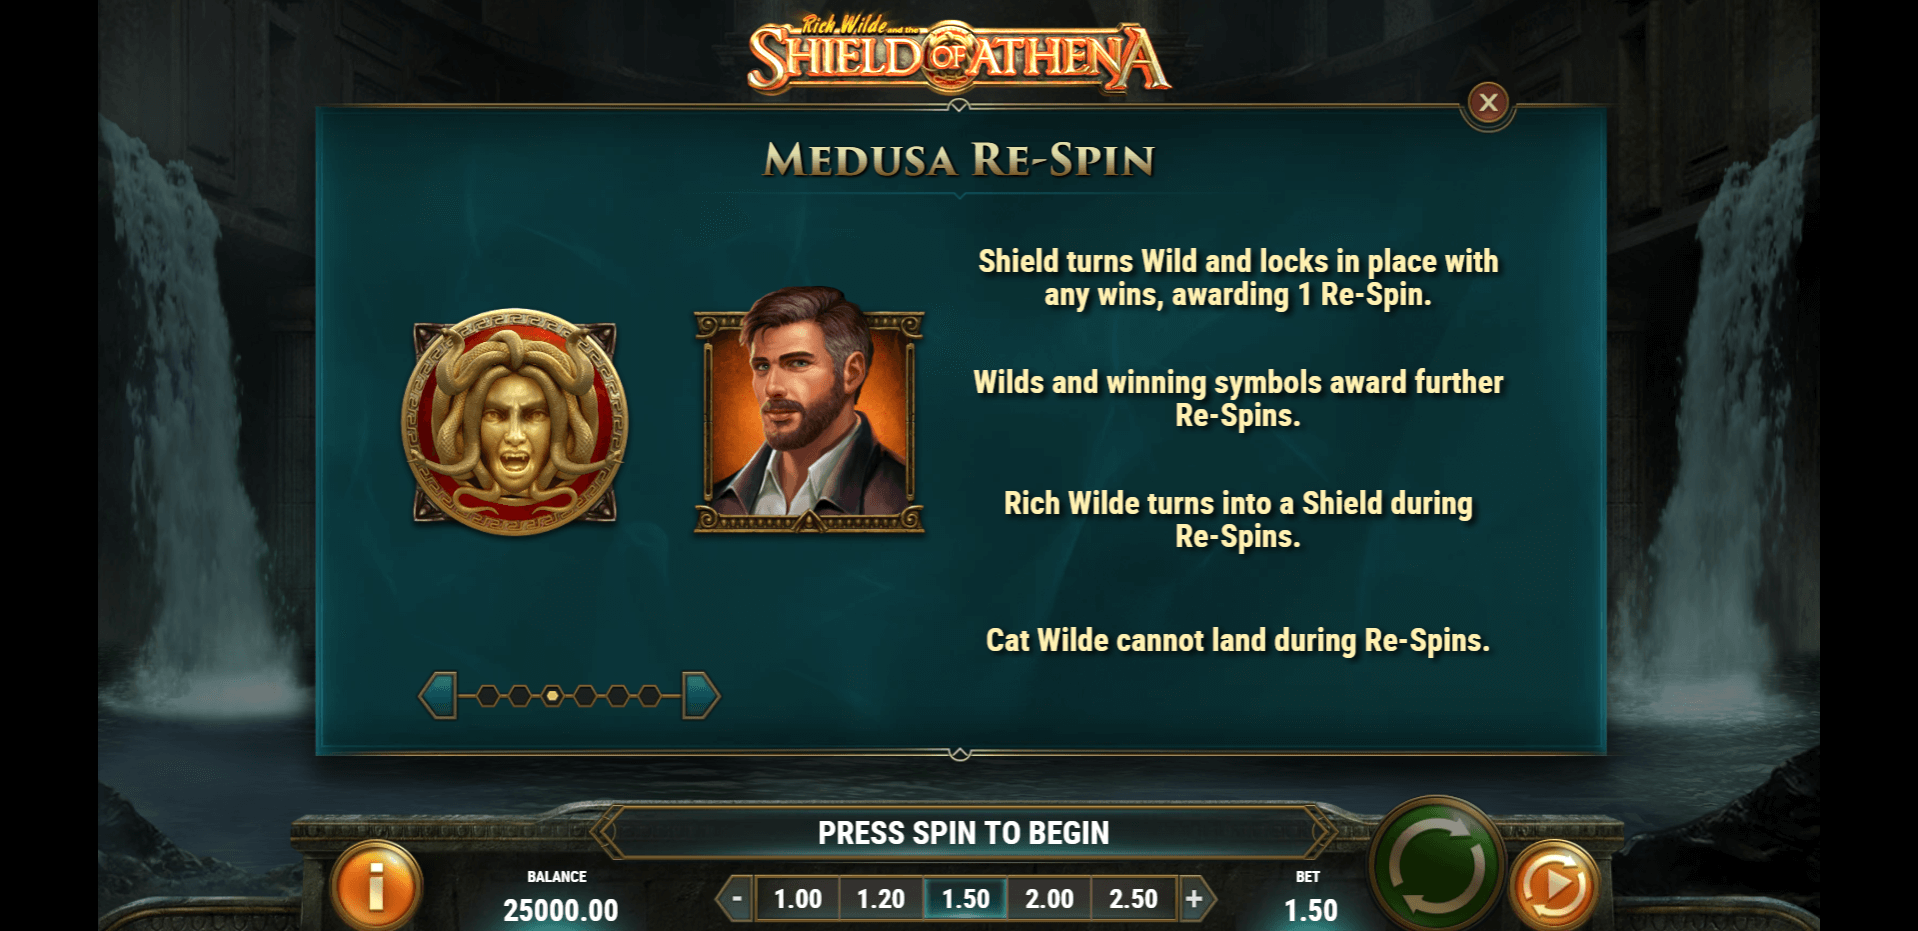 rich wilde and the shield of athena slot machine detail image 2